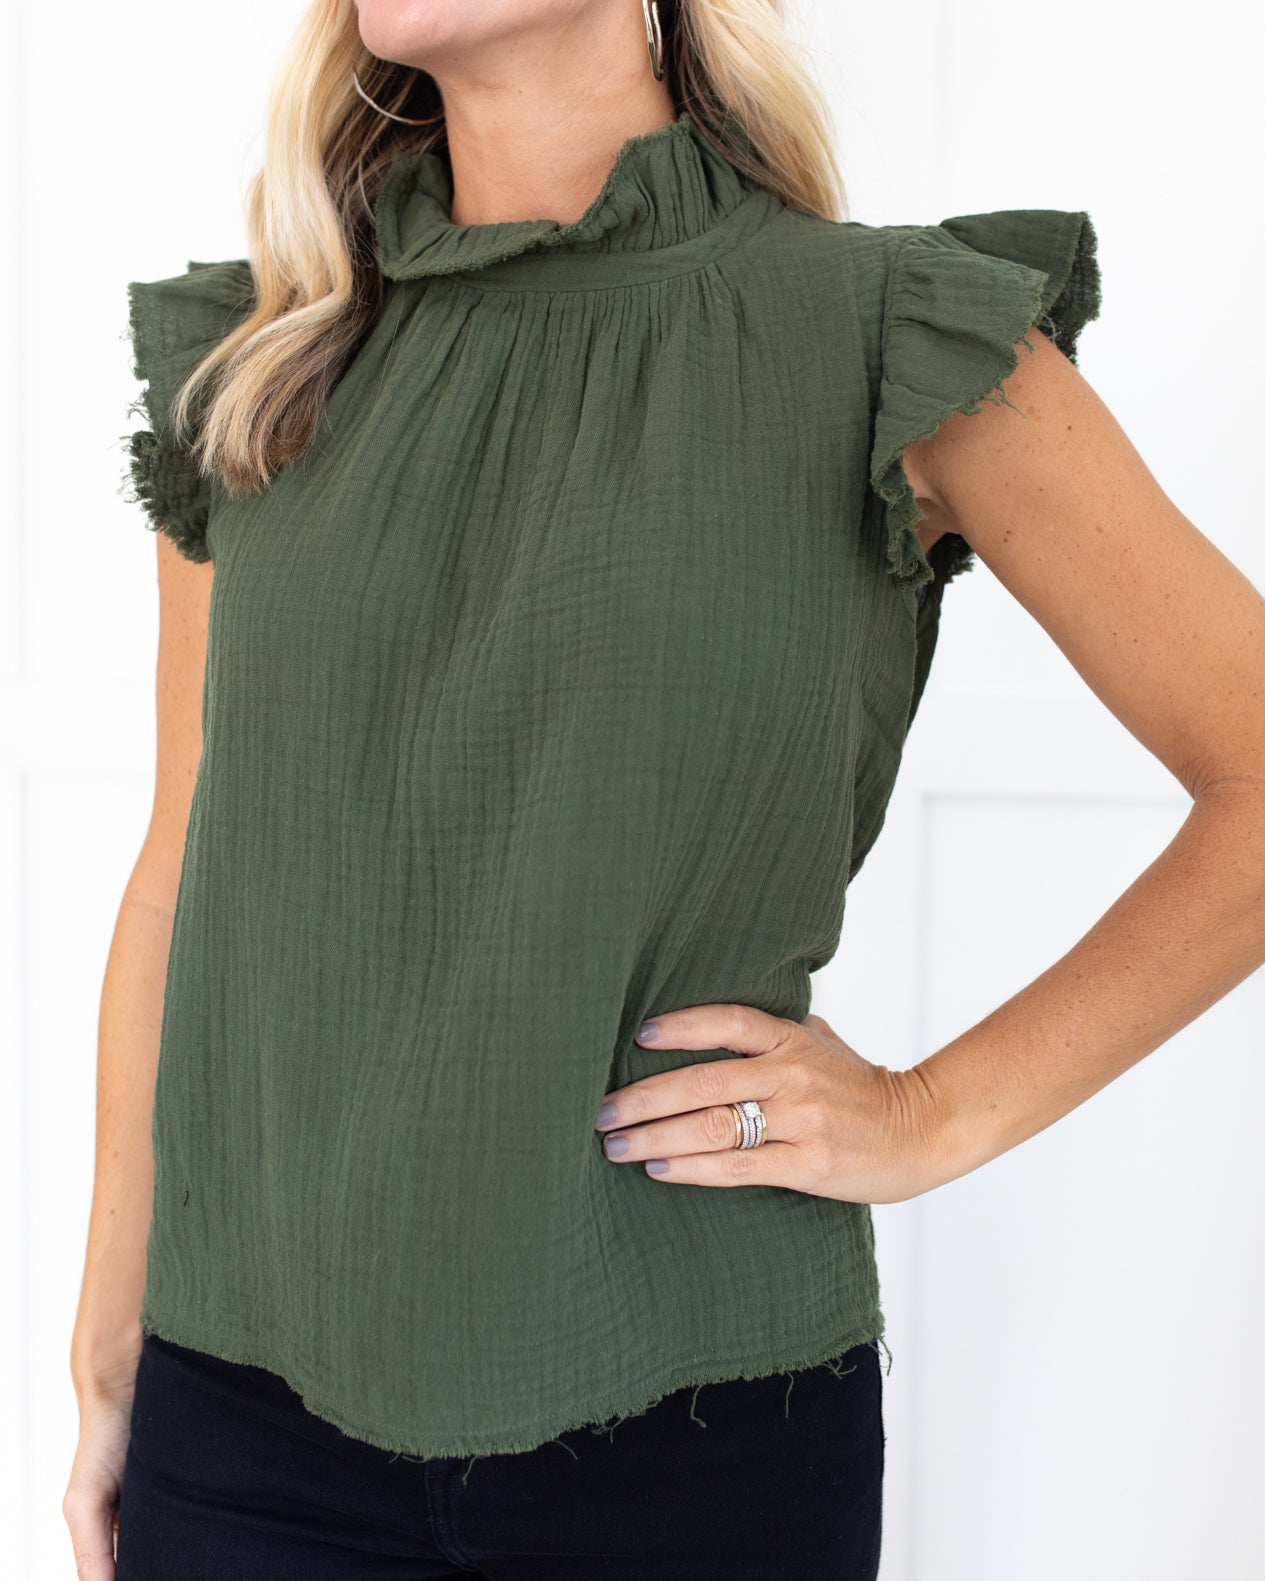 Gauze Ruffle Neck and Sleeveless Top in Army Green